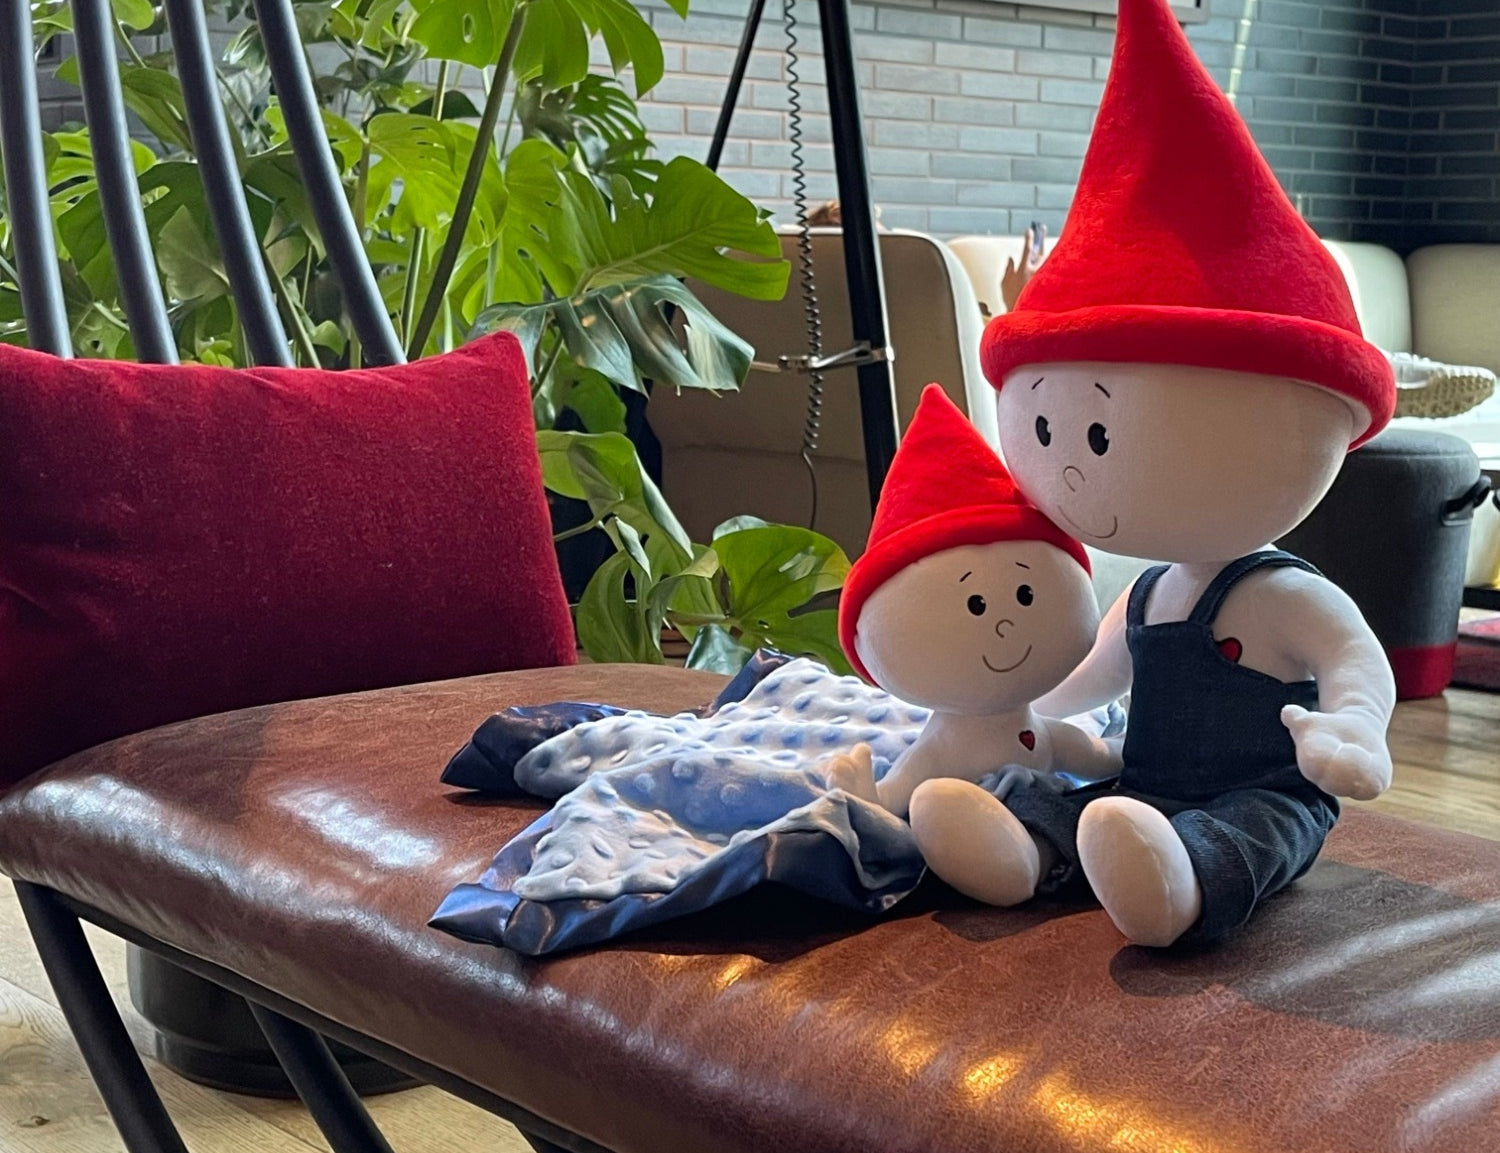 The Gnome Doll and Gnome Lovey are sitting together on a brown leather bench in a family's living room. The gnome doll is a soft stuffed doll that is white with a red pointy gnome hat and blue denim overalls. The gnome lovey is a soft stuffed doll that is white but is attached to a light blue blanket with navy blue trim. The lovey also has a red pointy gnome hat.